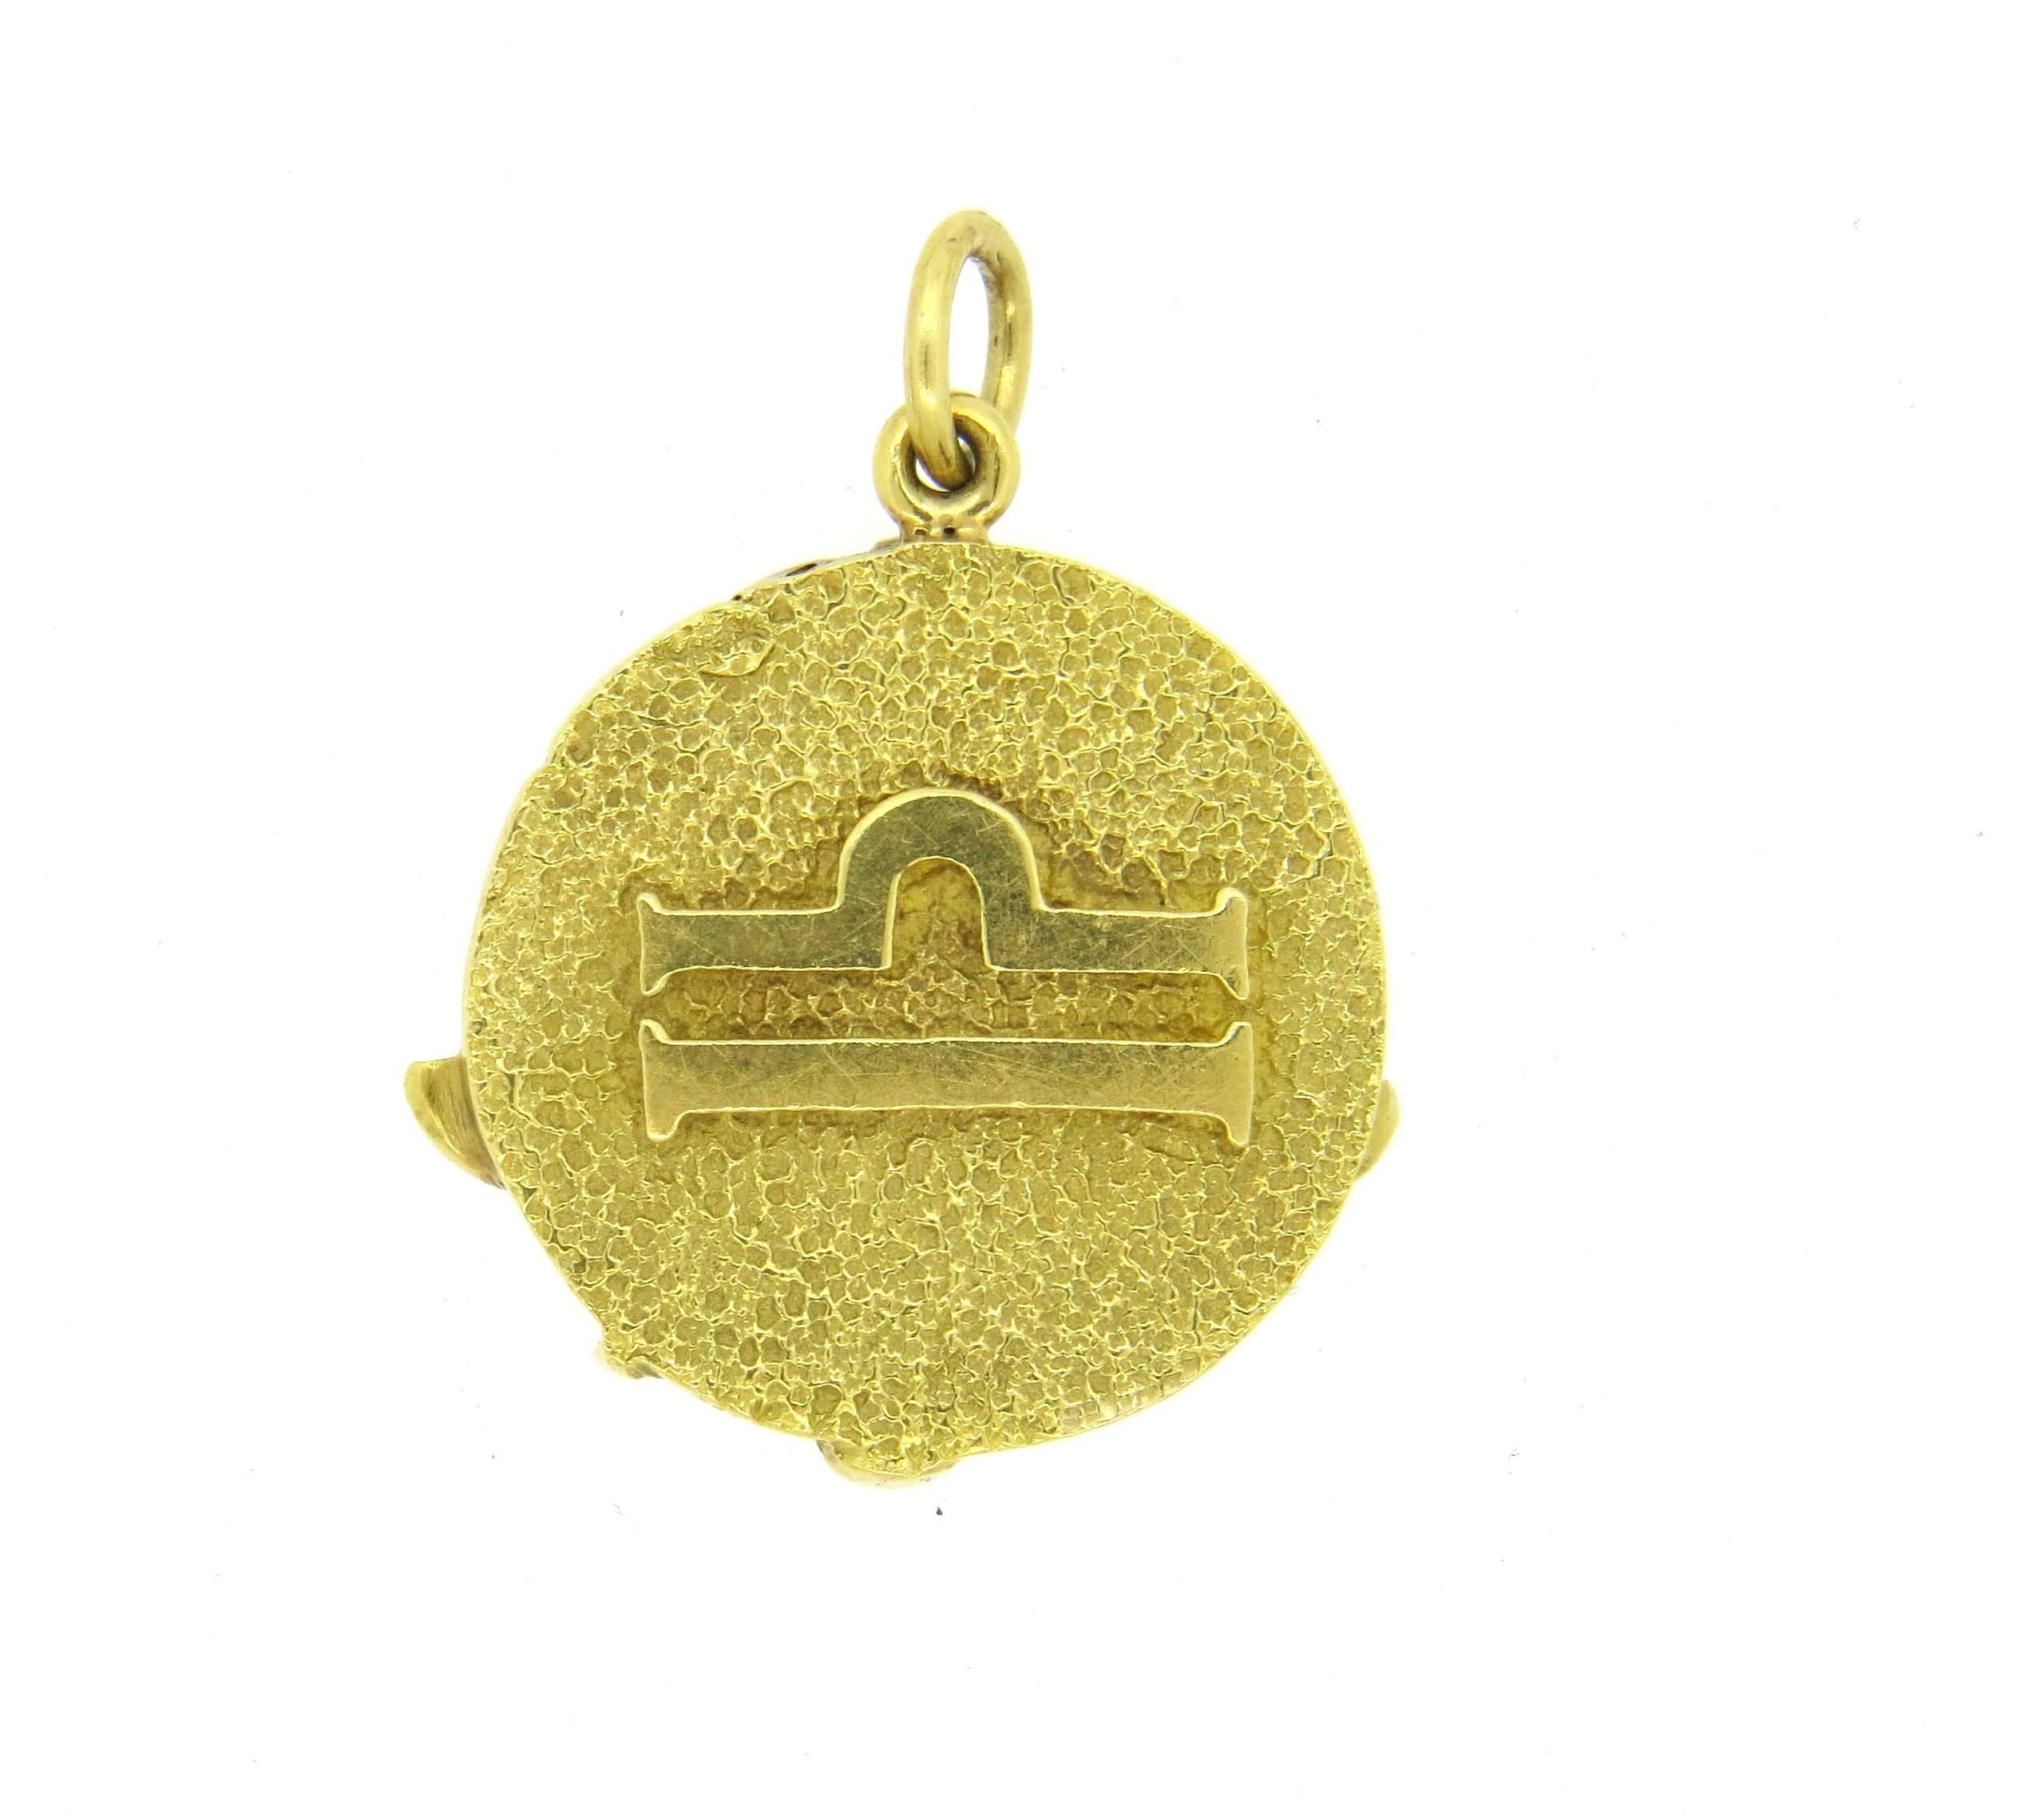 Vintage circa 1970s 18k yellow gold circle pendant, crafted by Tiffany & Co, depicting Libra Zodiac sign. Pendant is 25mm in diameter. Marked : k18 Tiffany, Italy. Weight of the piece - 13 grams